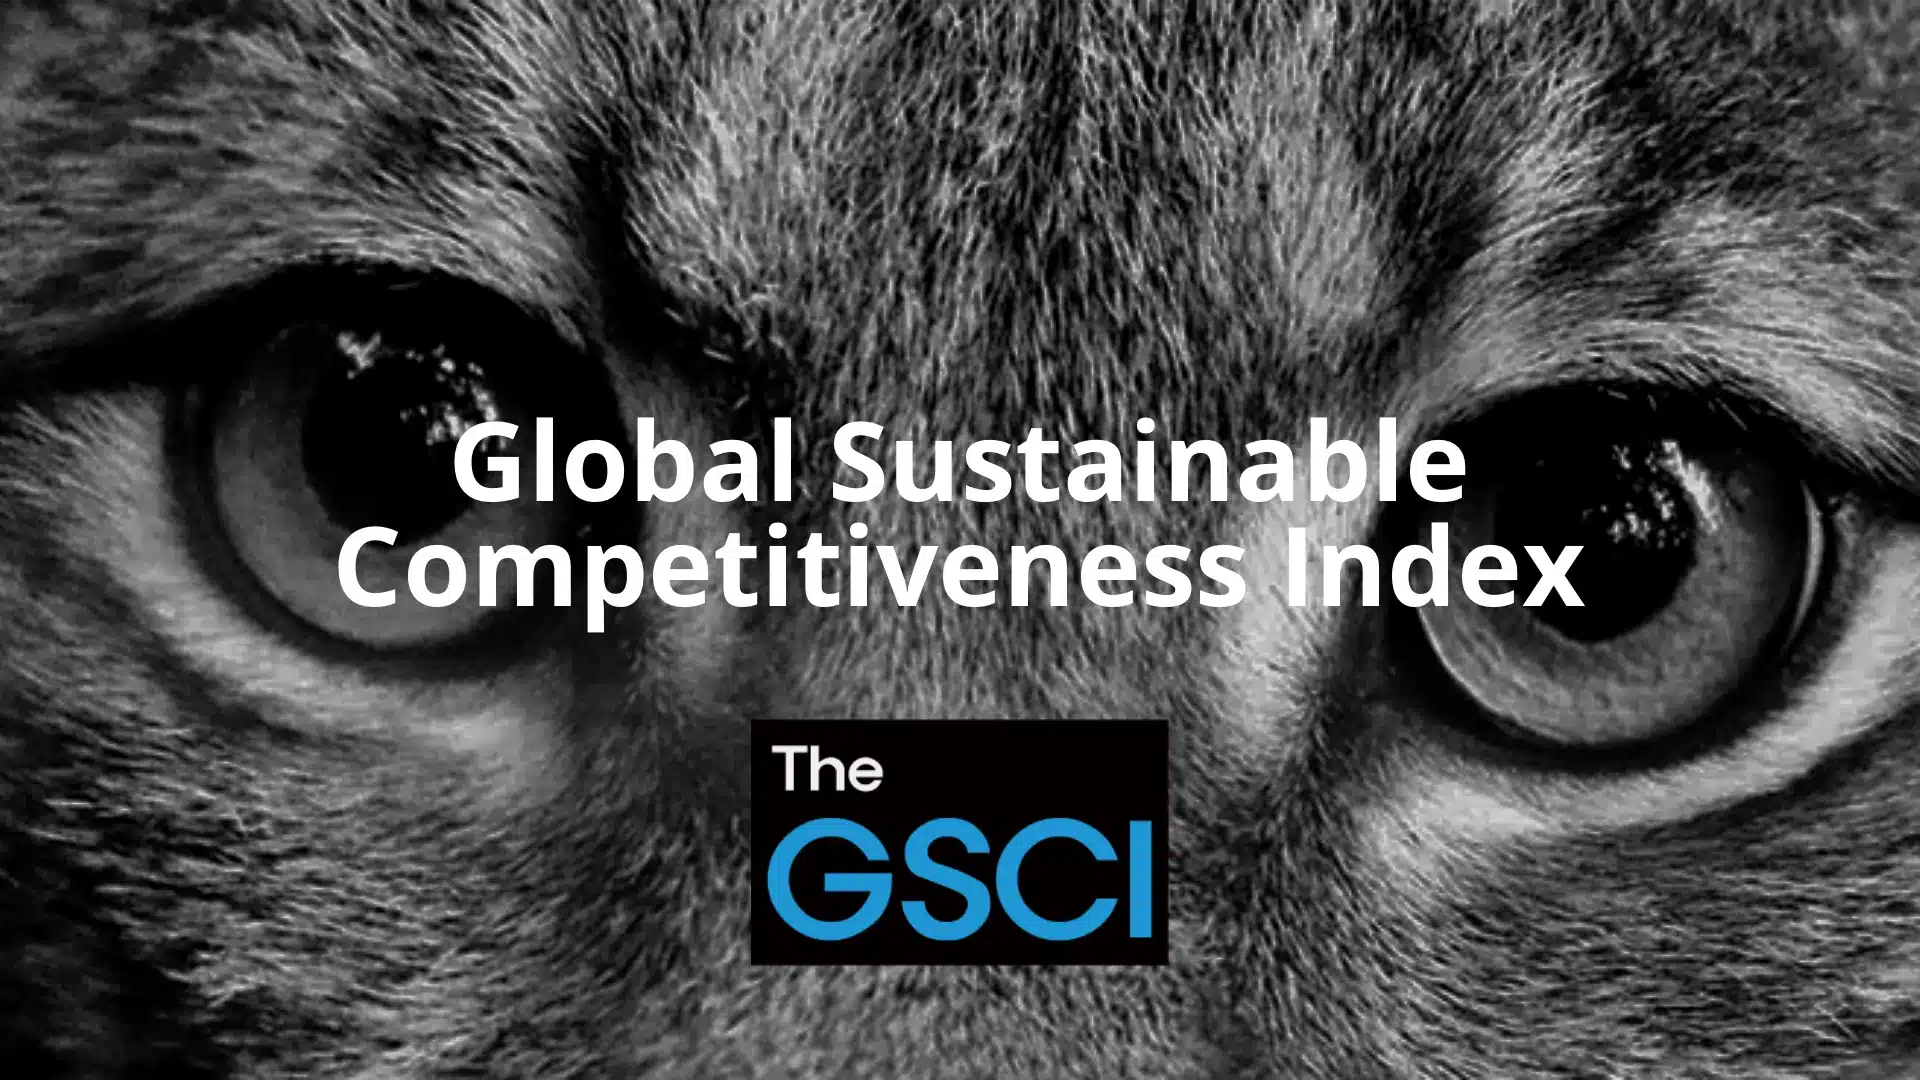 thefuture, Resurs, Global Sustainable Competitiveness Index